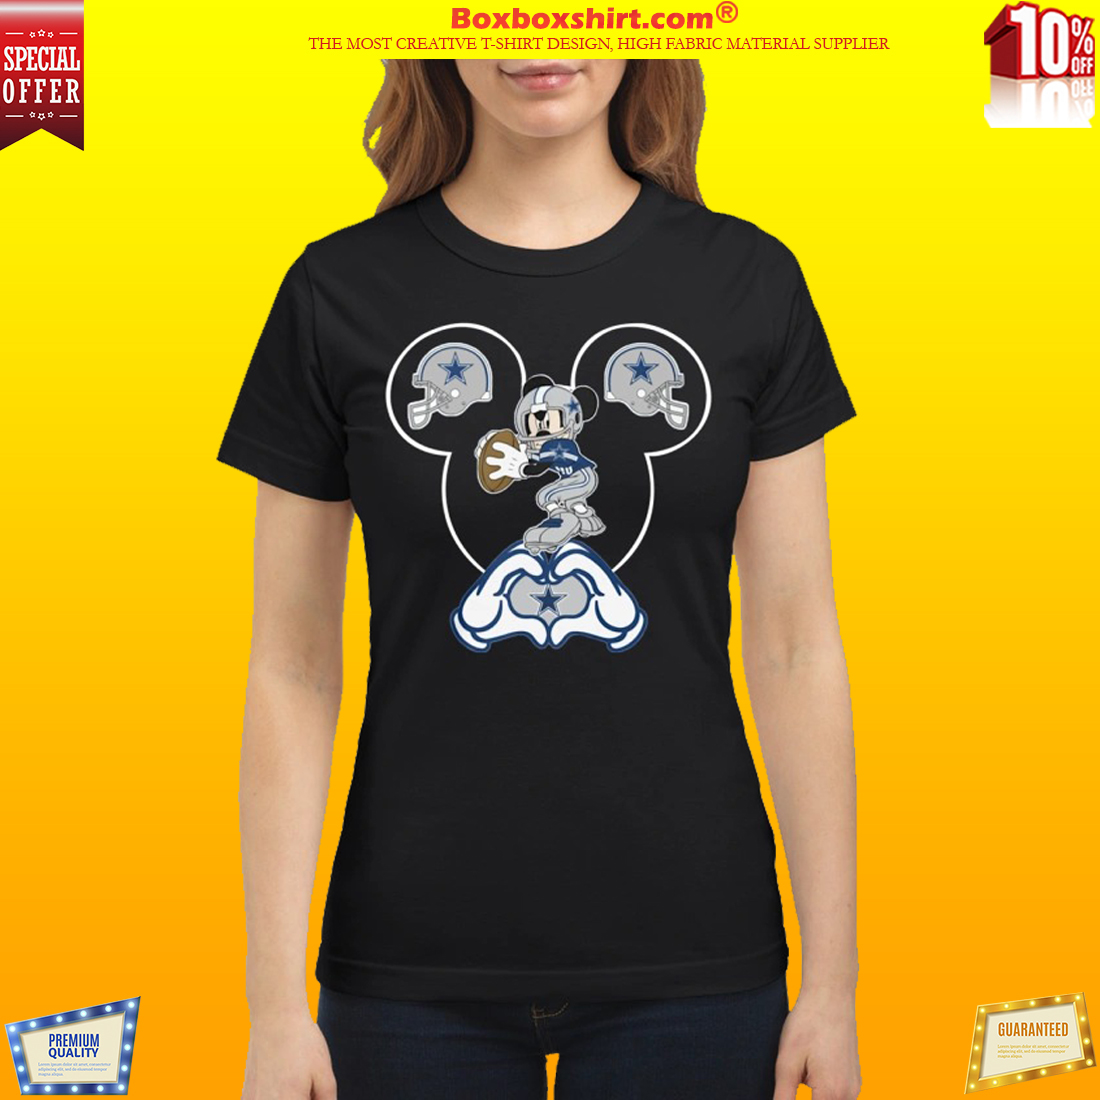 [NEWEST] Mickey Mouse Dallas Cowboys shirt